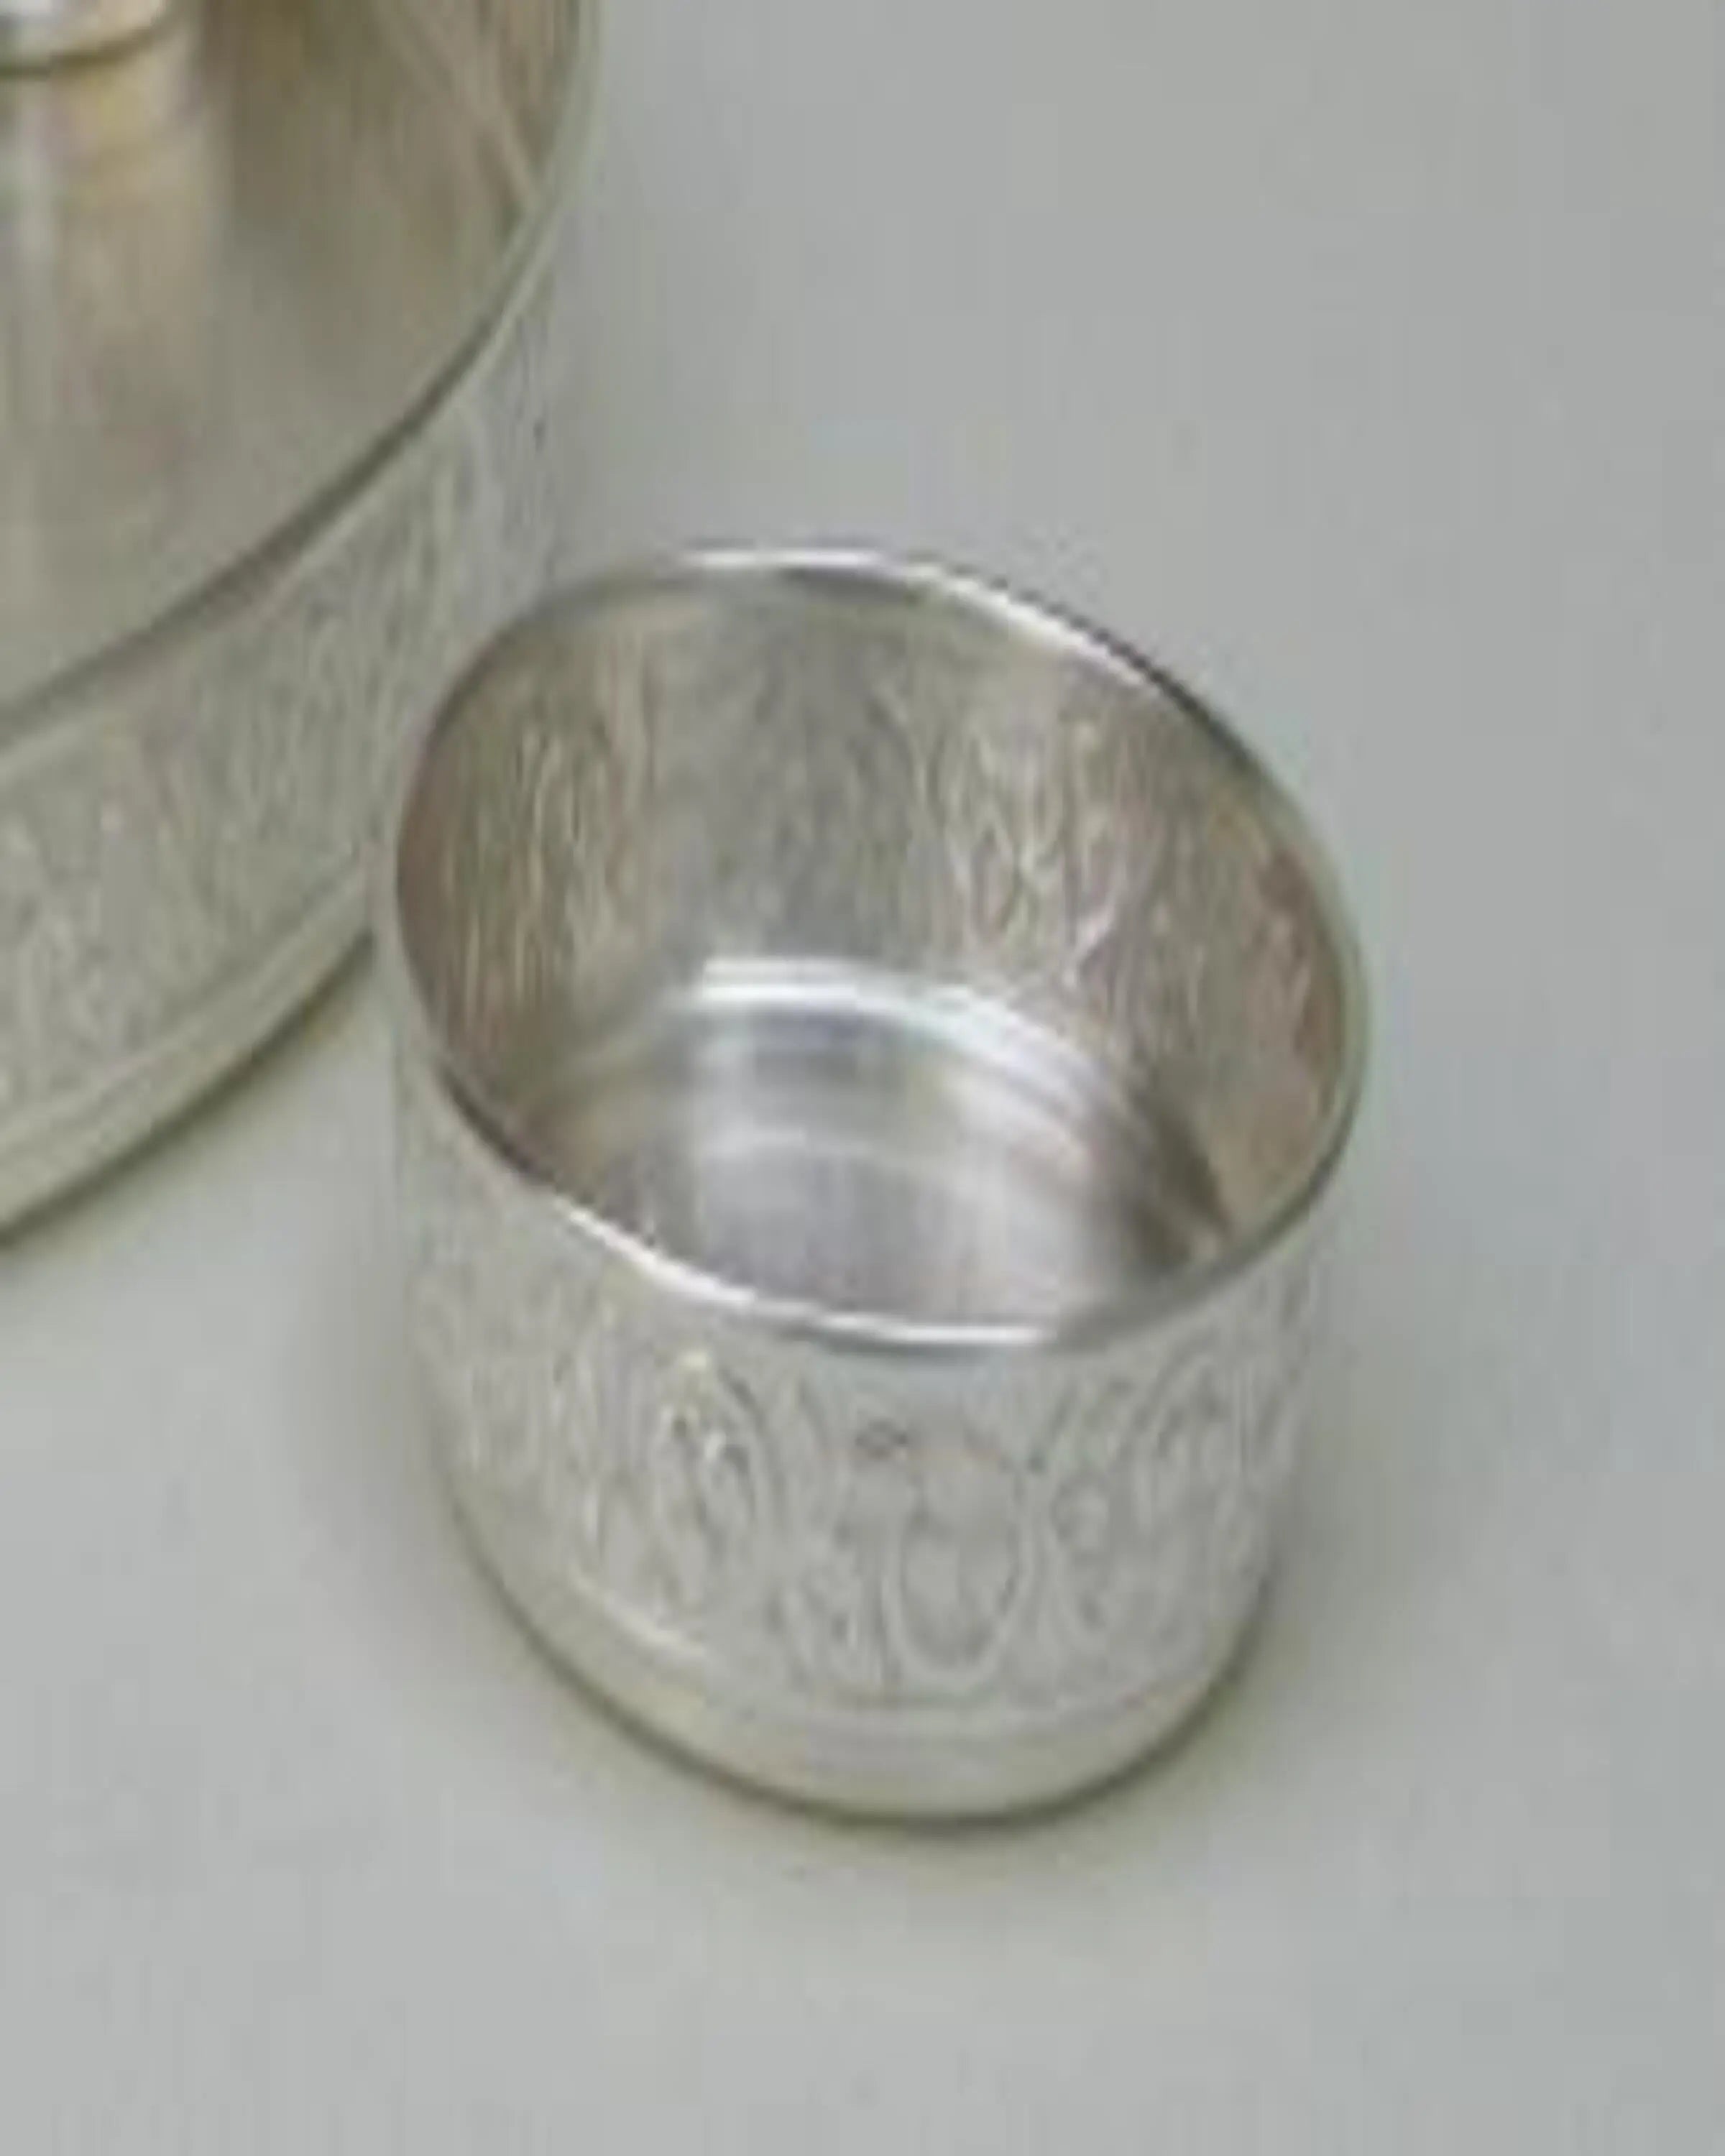 Rumiko Designer Silver Plated Bowl ANGIE HOMES